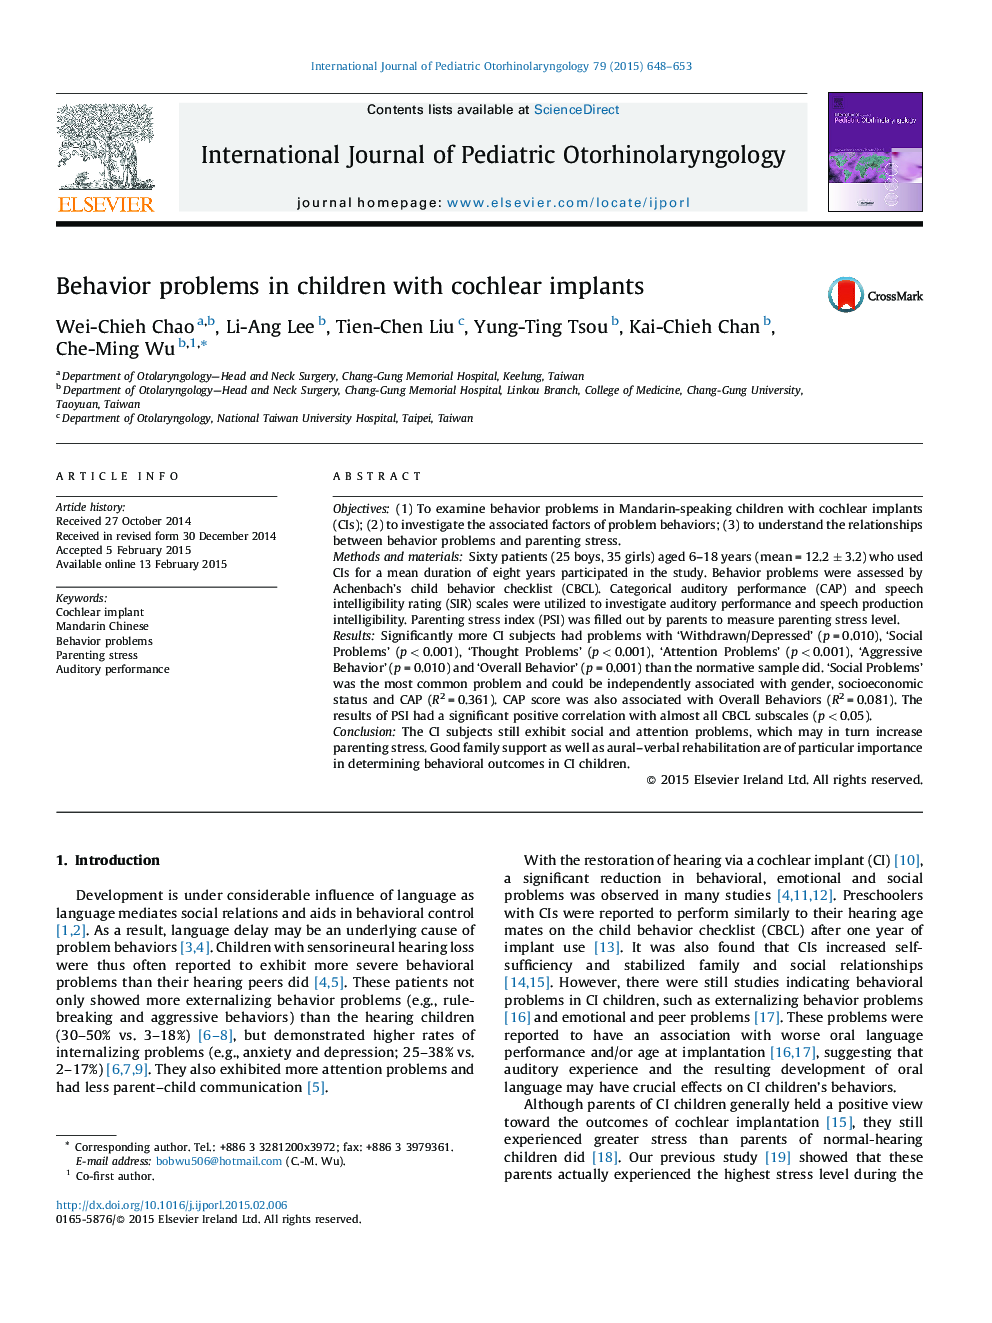 Behavior problems in children with cochlear implants